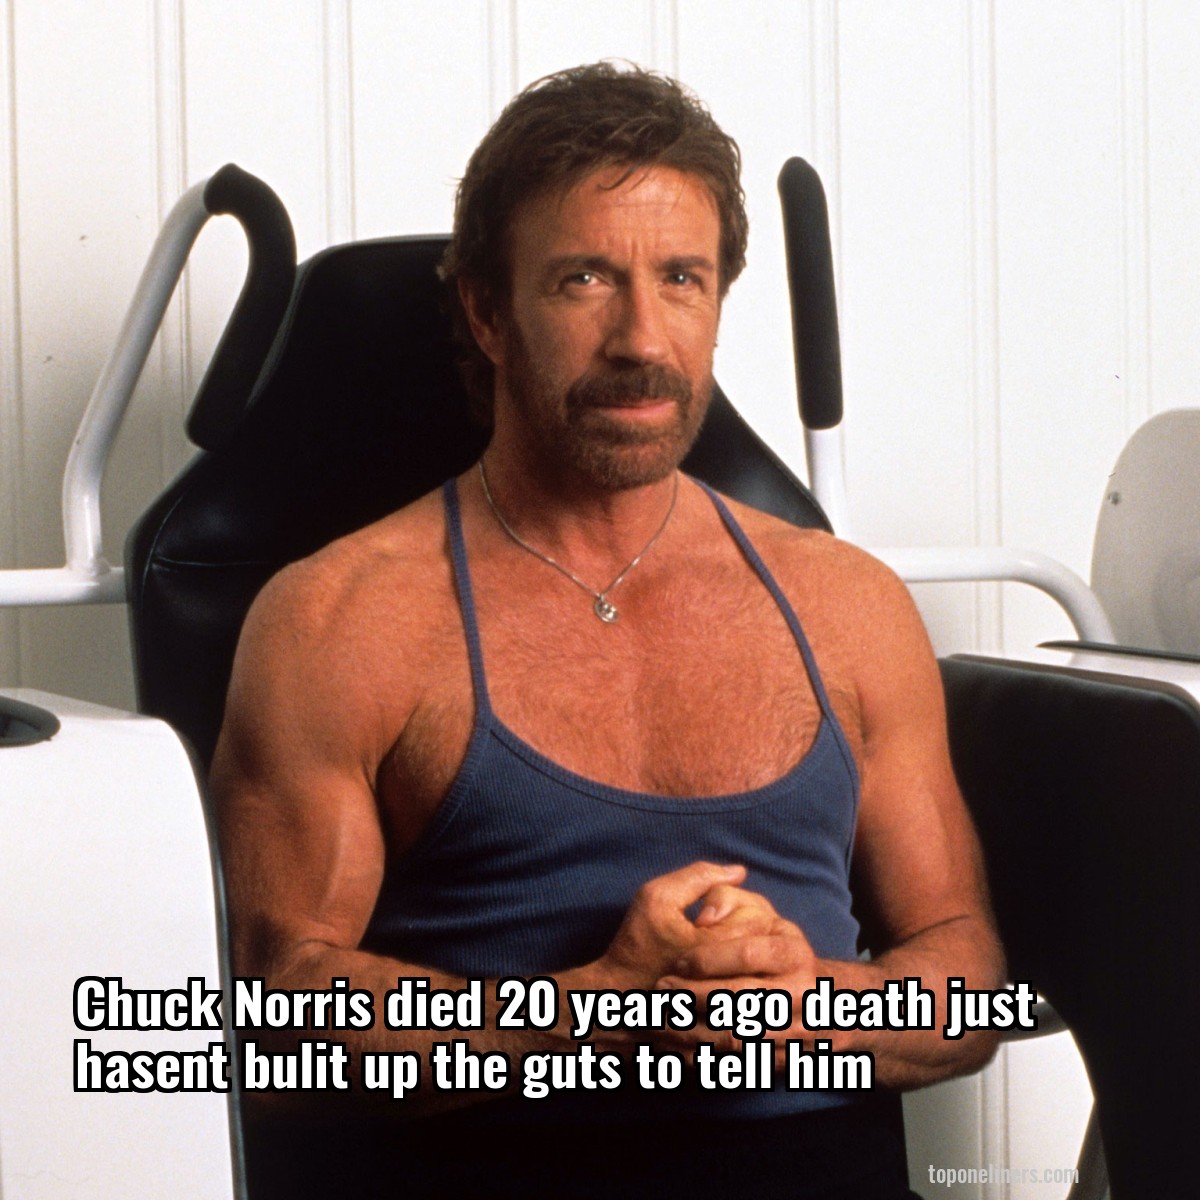 Chuck Norris died 20 years ago death just hasent bulit up the guts to tell him